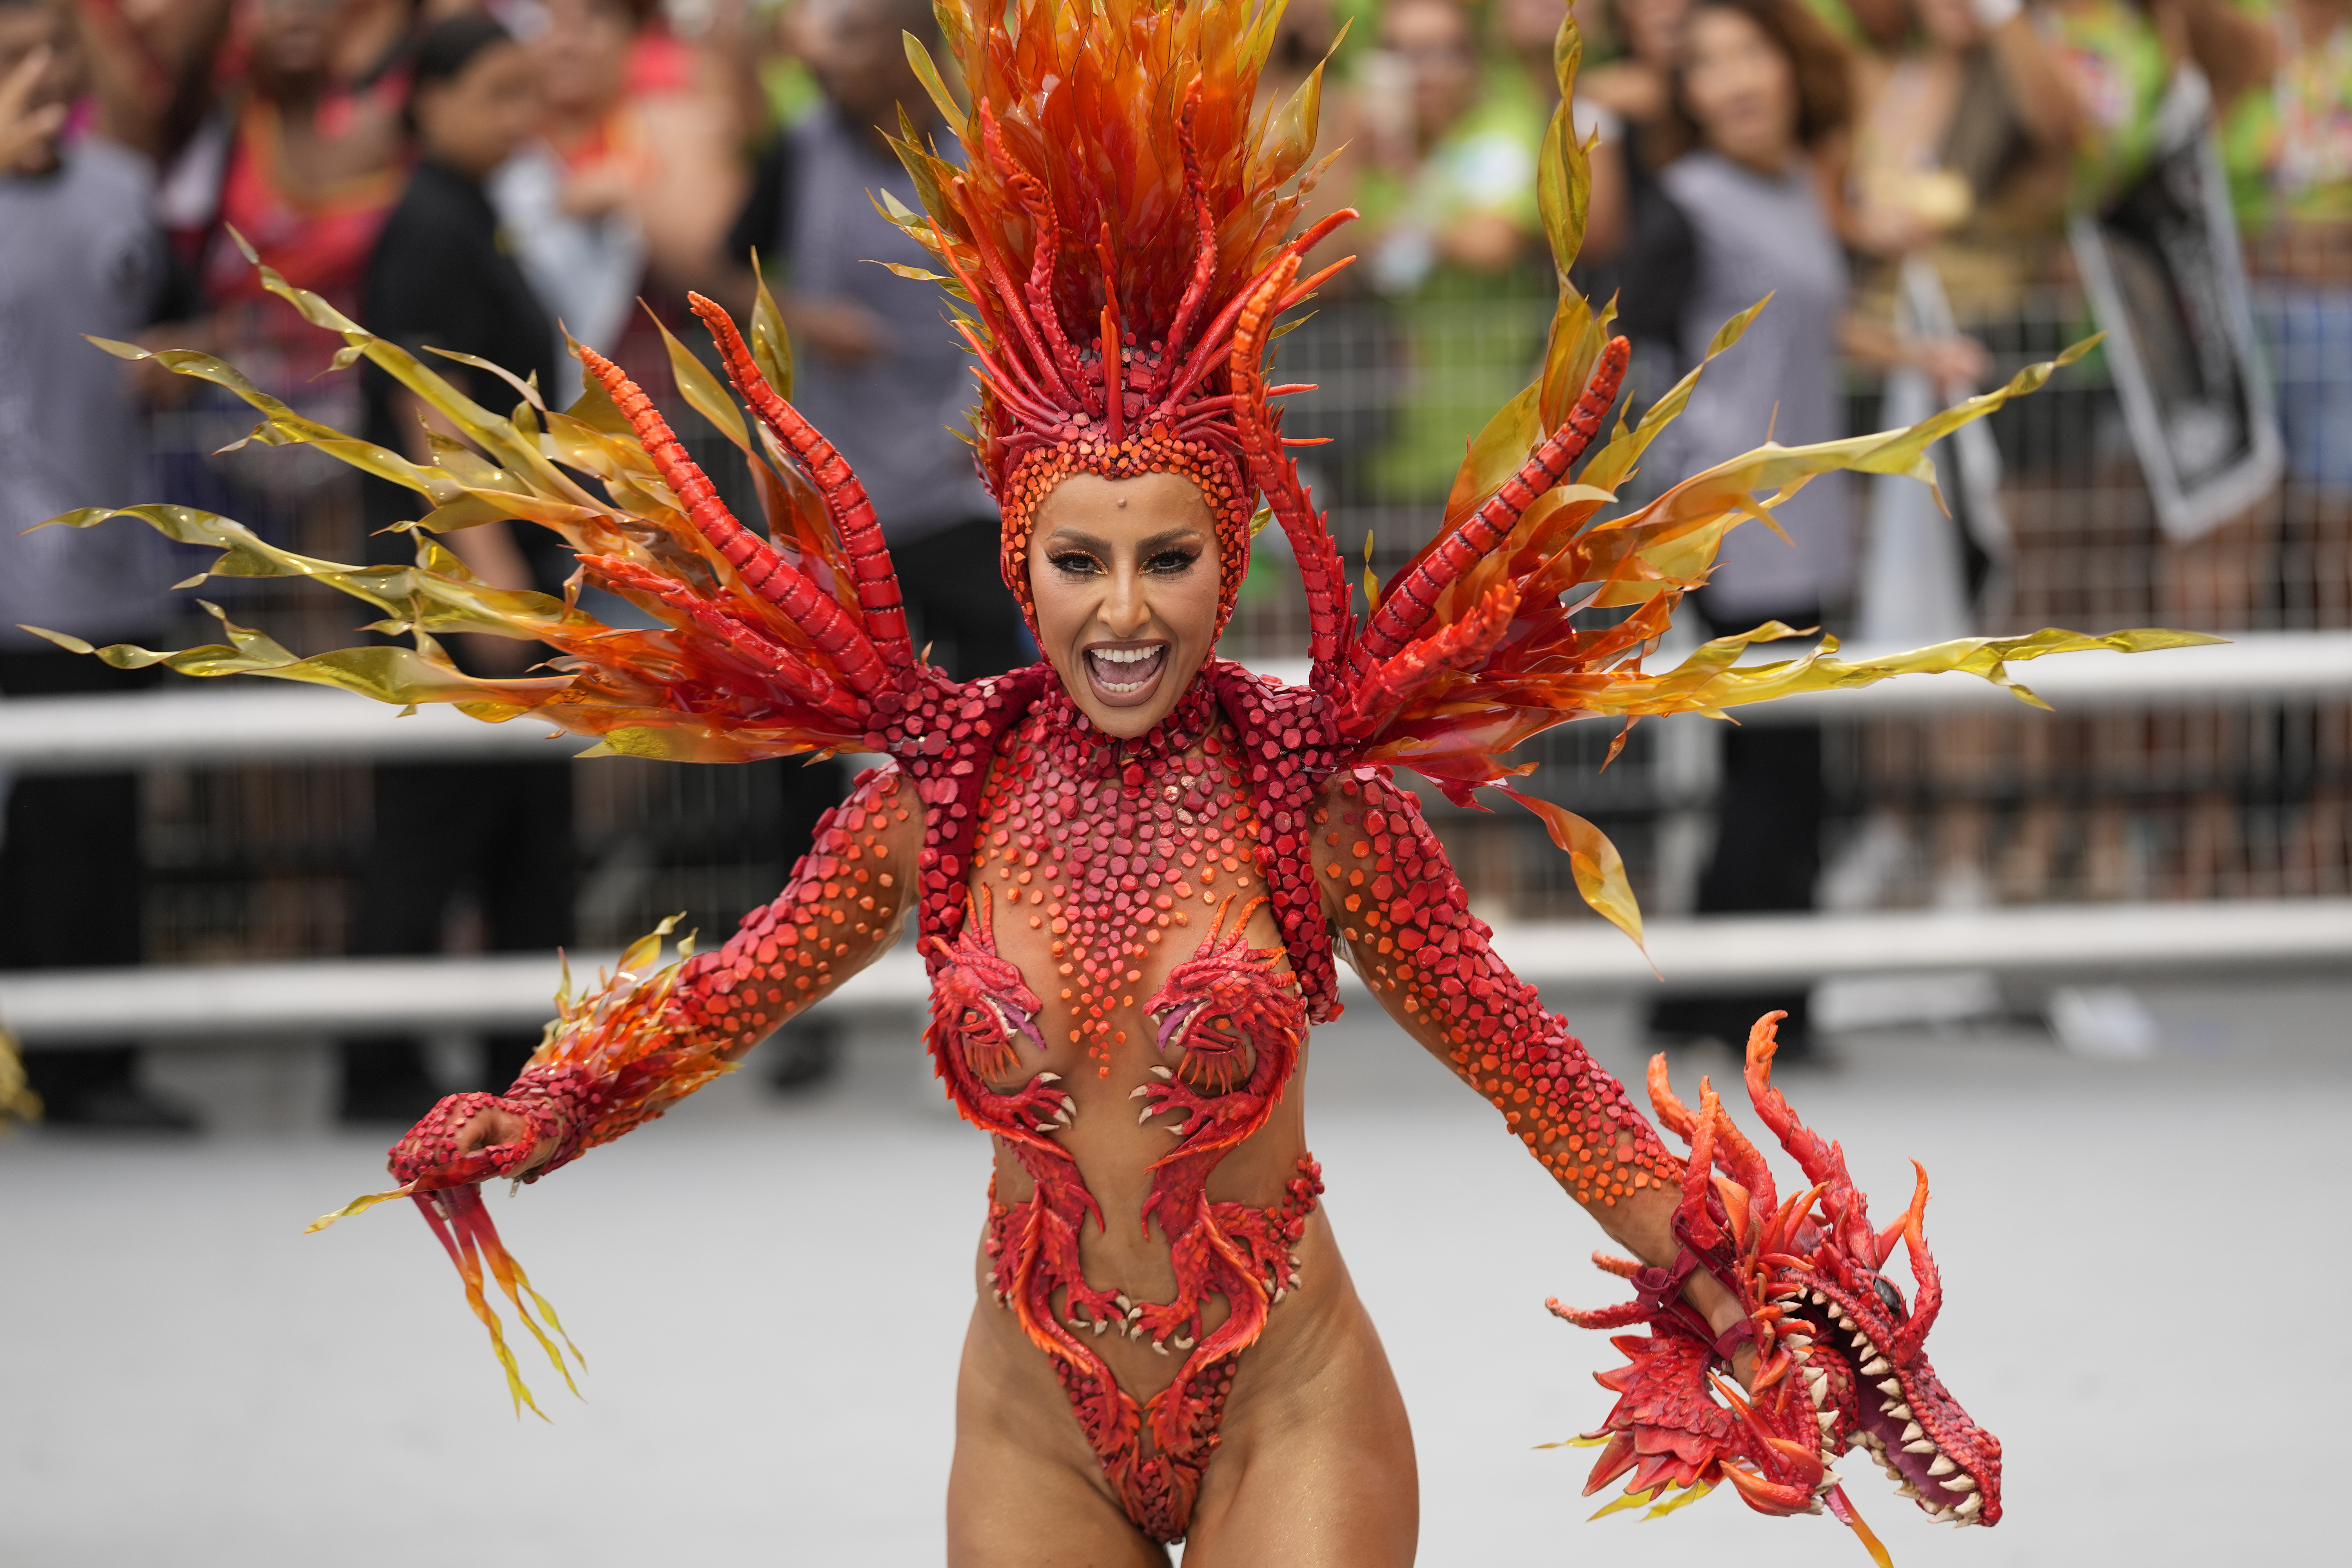 Brazilian Beauties: A Hot and Heavy Gallery of O Que Significa o Carnaval Celebrations